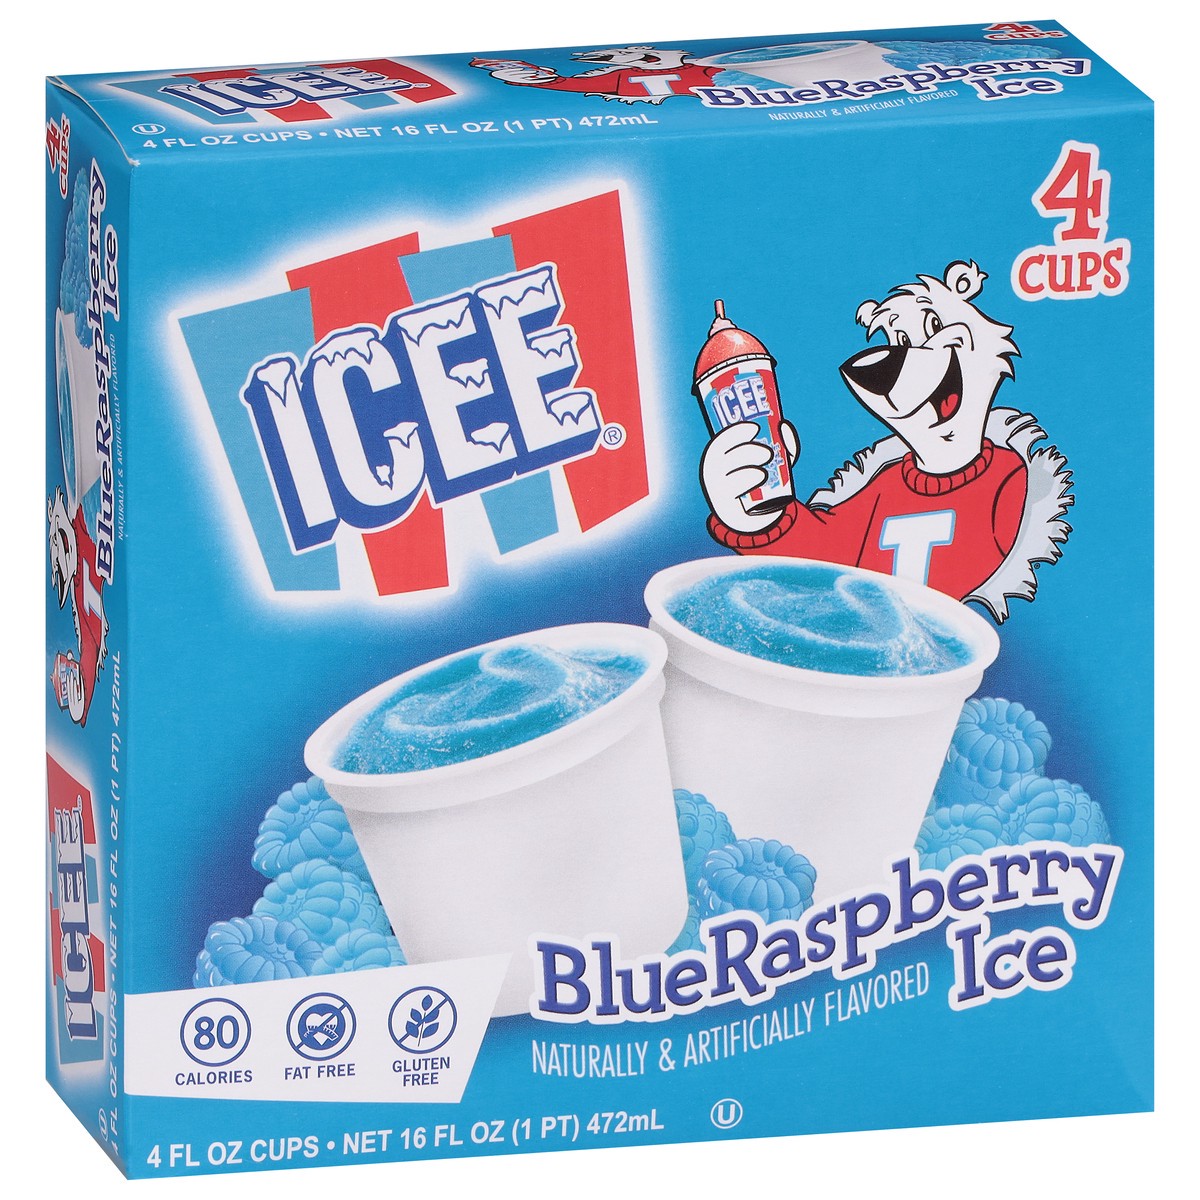 slide 2 of 11, ICEE BlueRaspberry Ice Cups 4 - 4 fl oz Cups, 4 ct